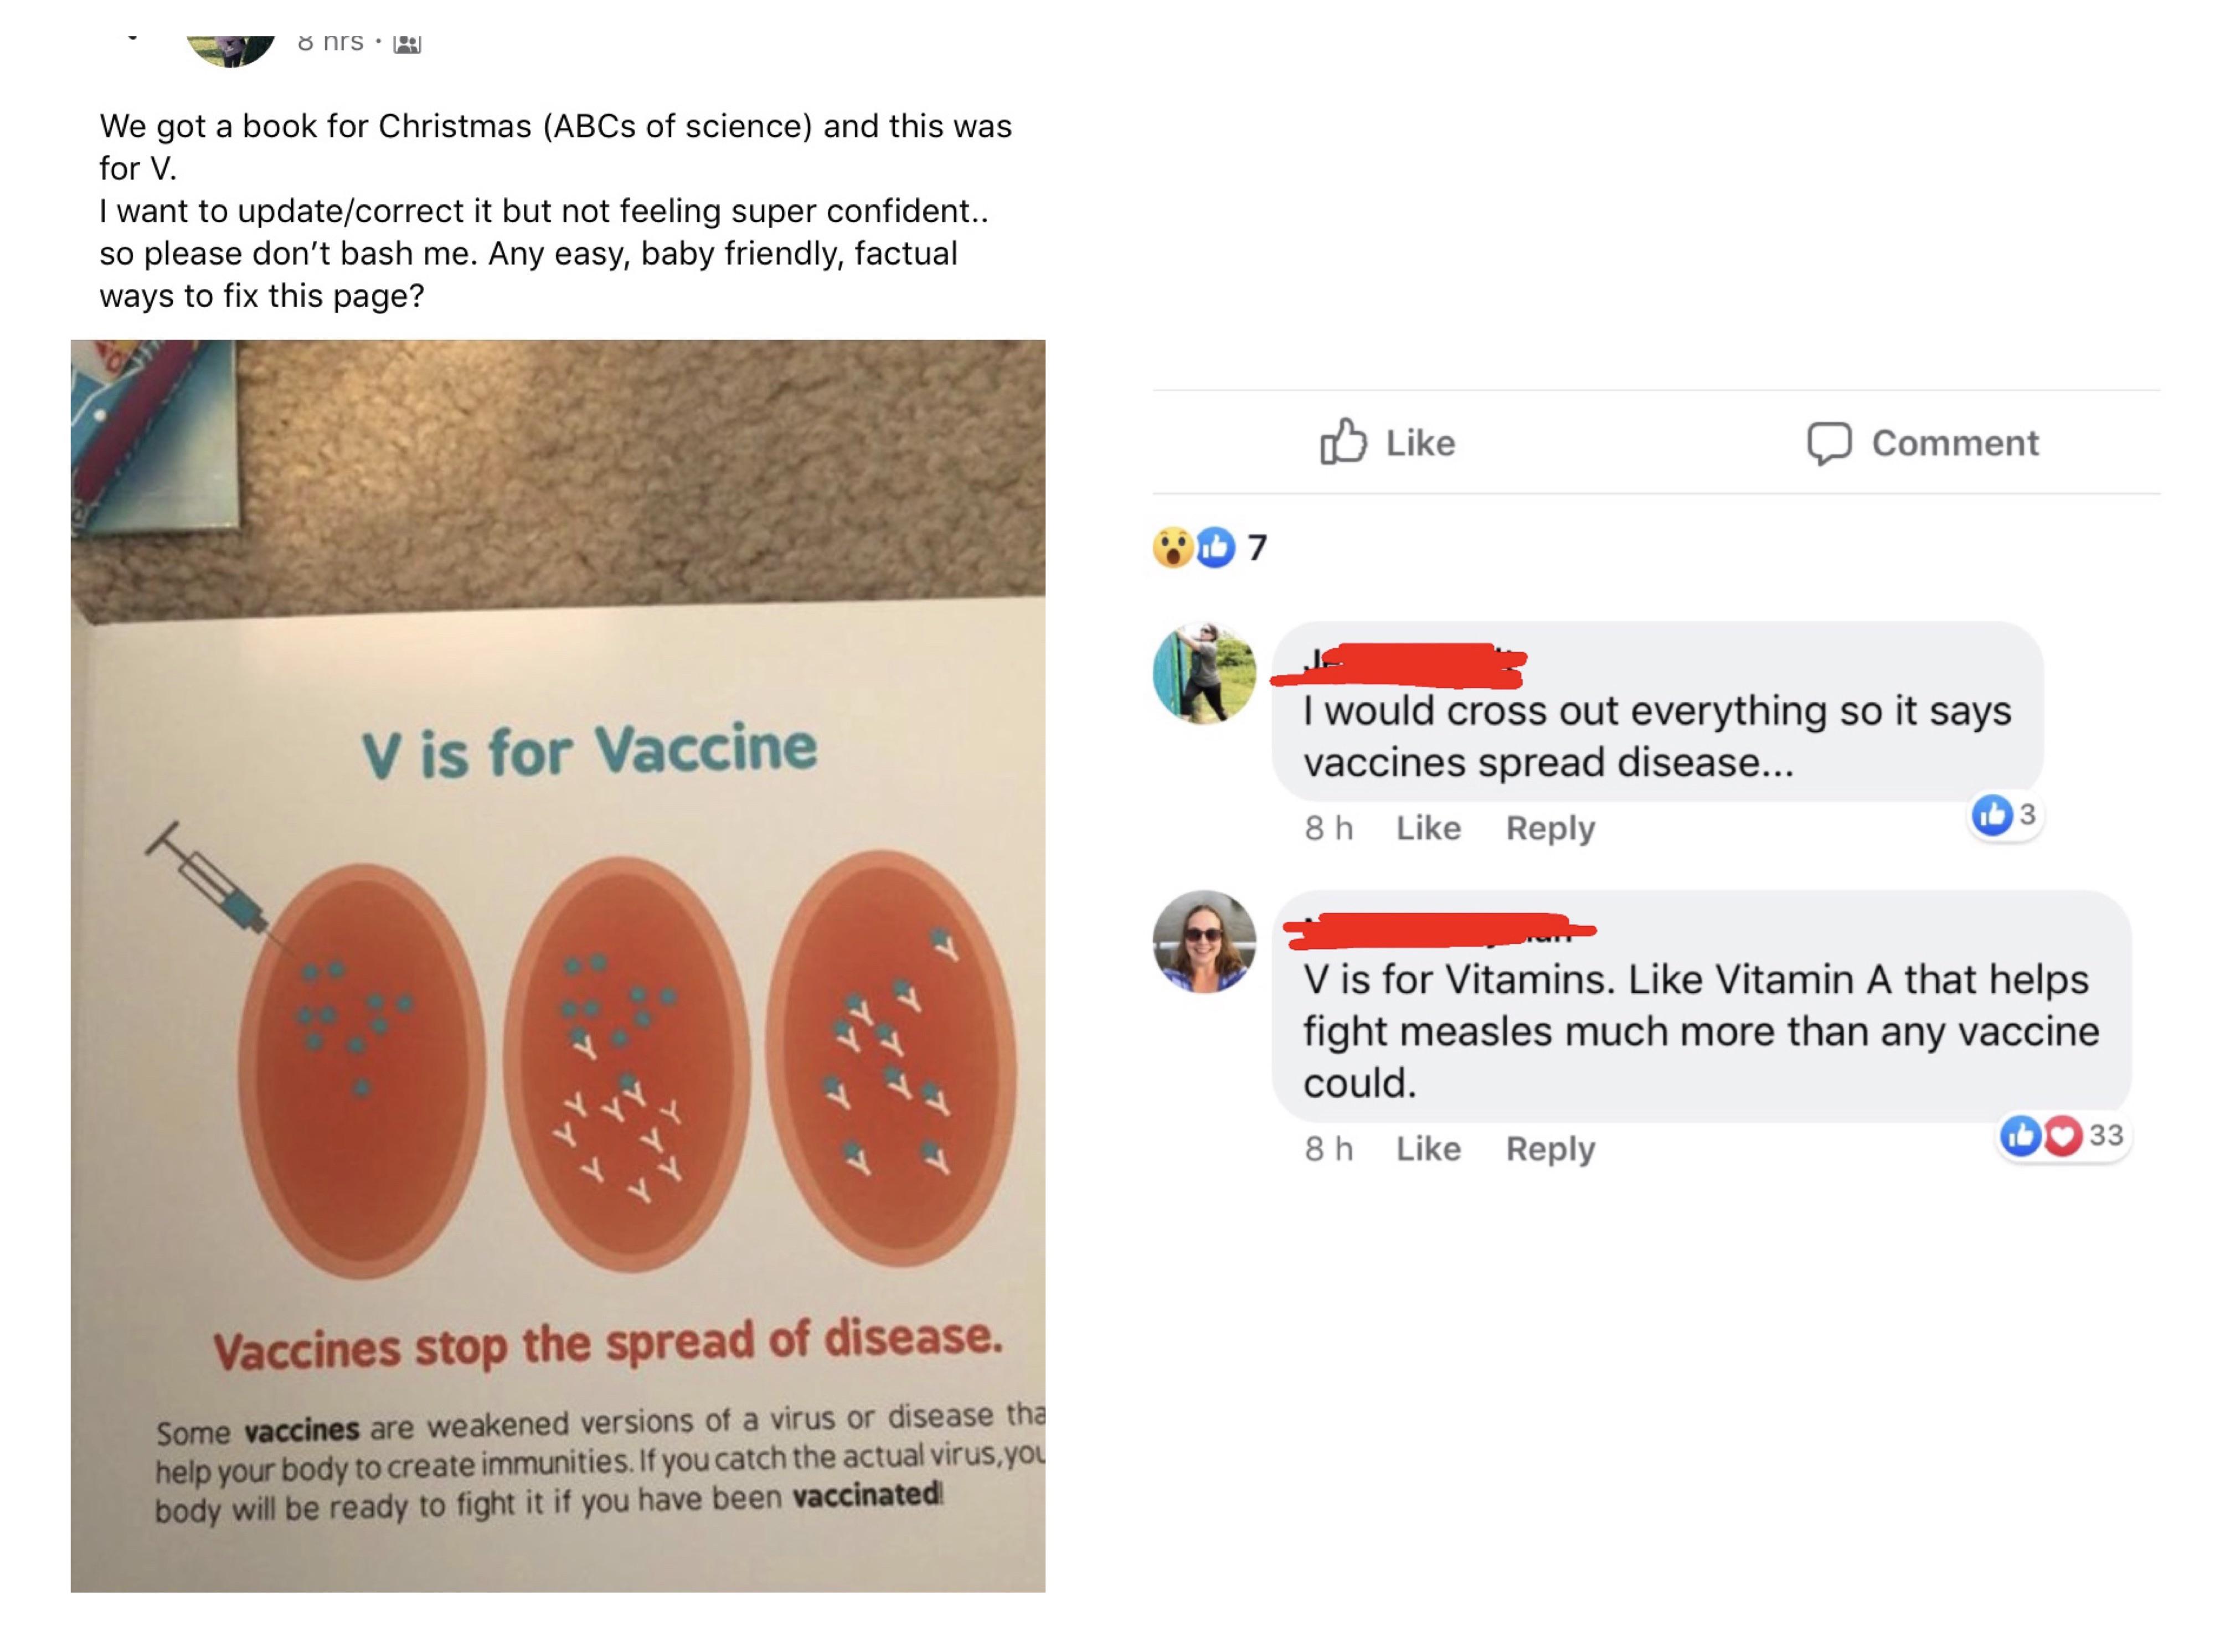 website - . We got a book for Christmas ABCs of science and this was for V. I want to updatecorrect it but not feeling super confident.. so please don't bash me. Any easy, baby friendly, factual ways to fix this page? Comment V is for Vaccine I would cros